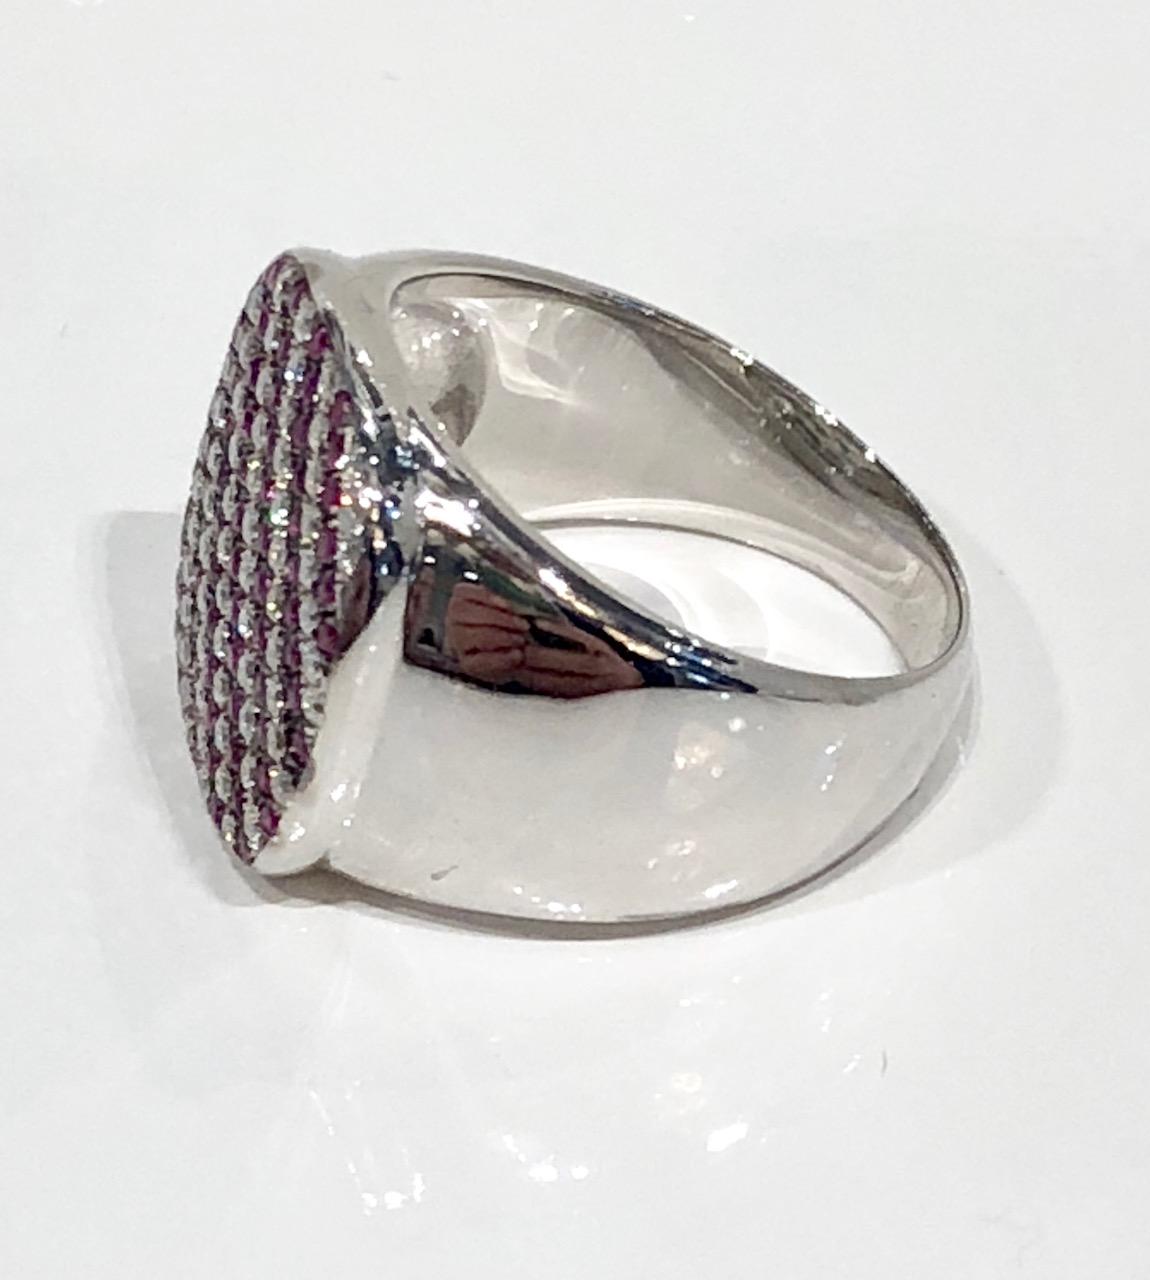 Unisex 18k white gold Signet Ring. Diamond and ruby pave face.
Designed by Martyn Lawrence Bullard
Can be made in any size, lead time 4 weeks
